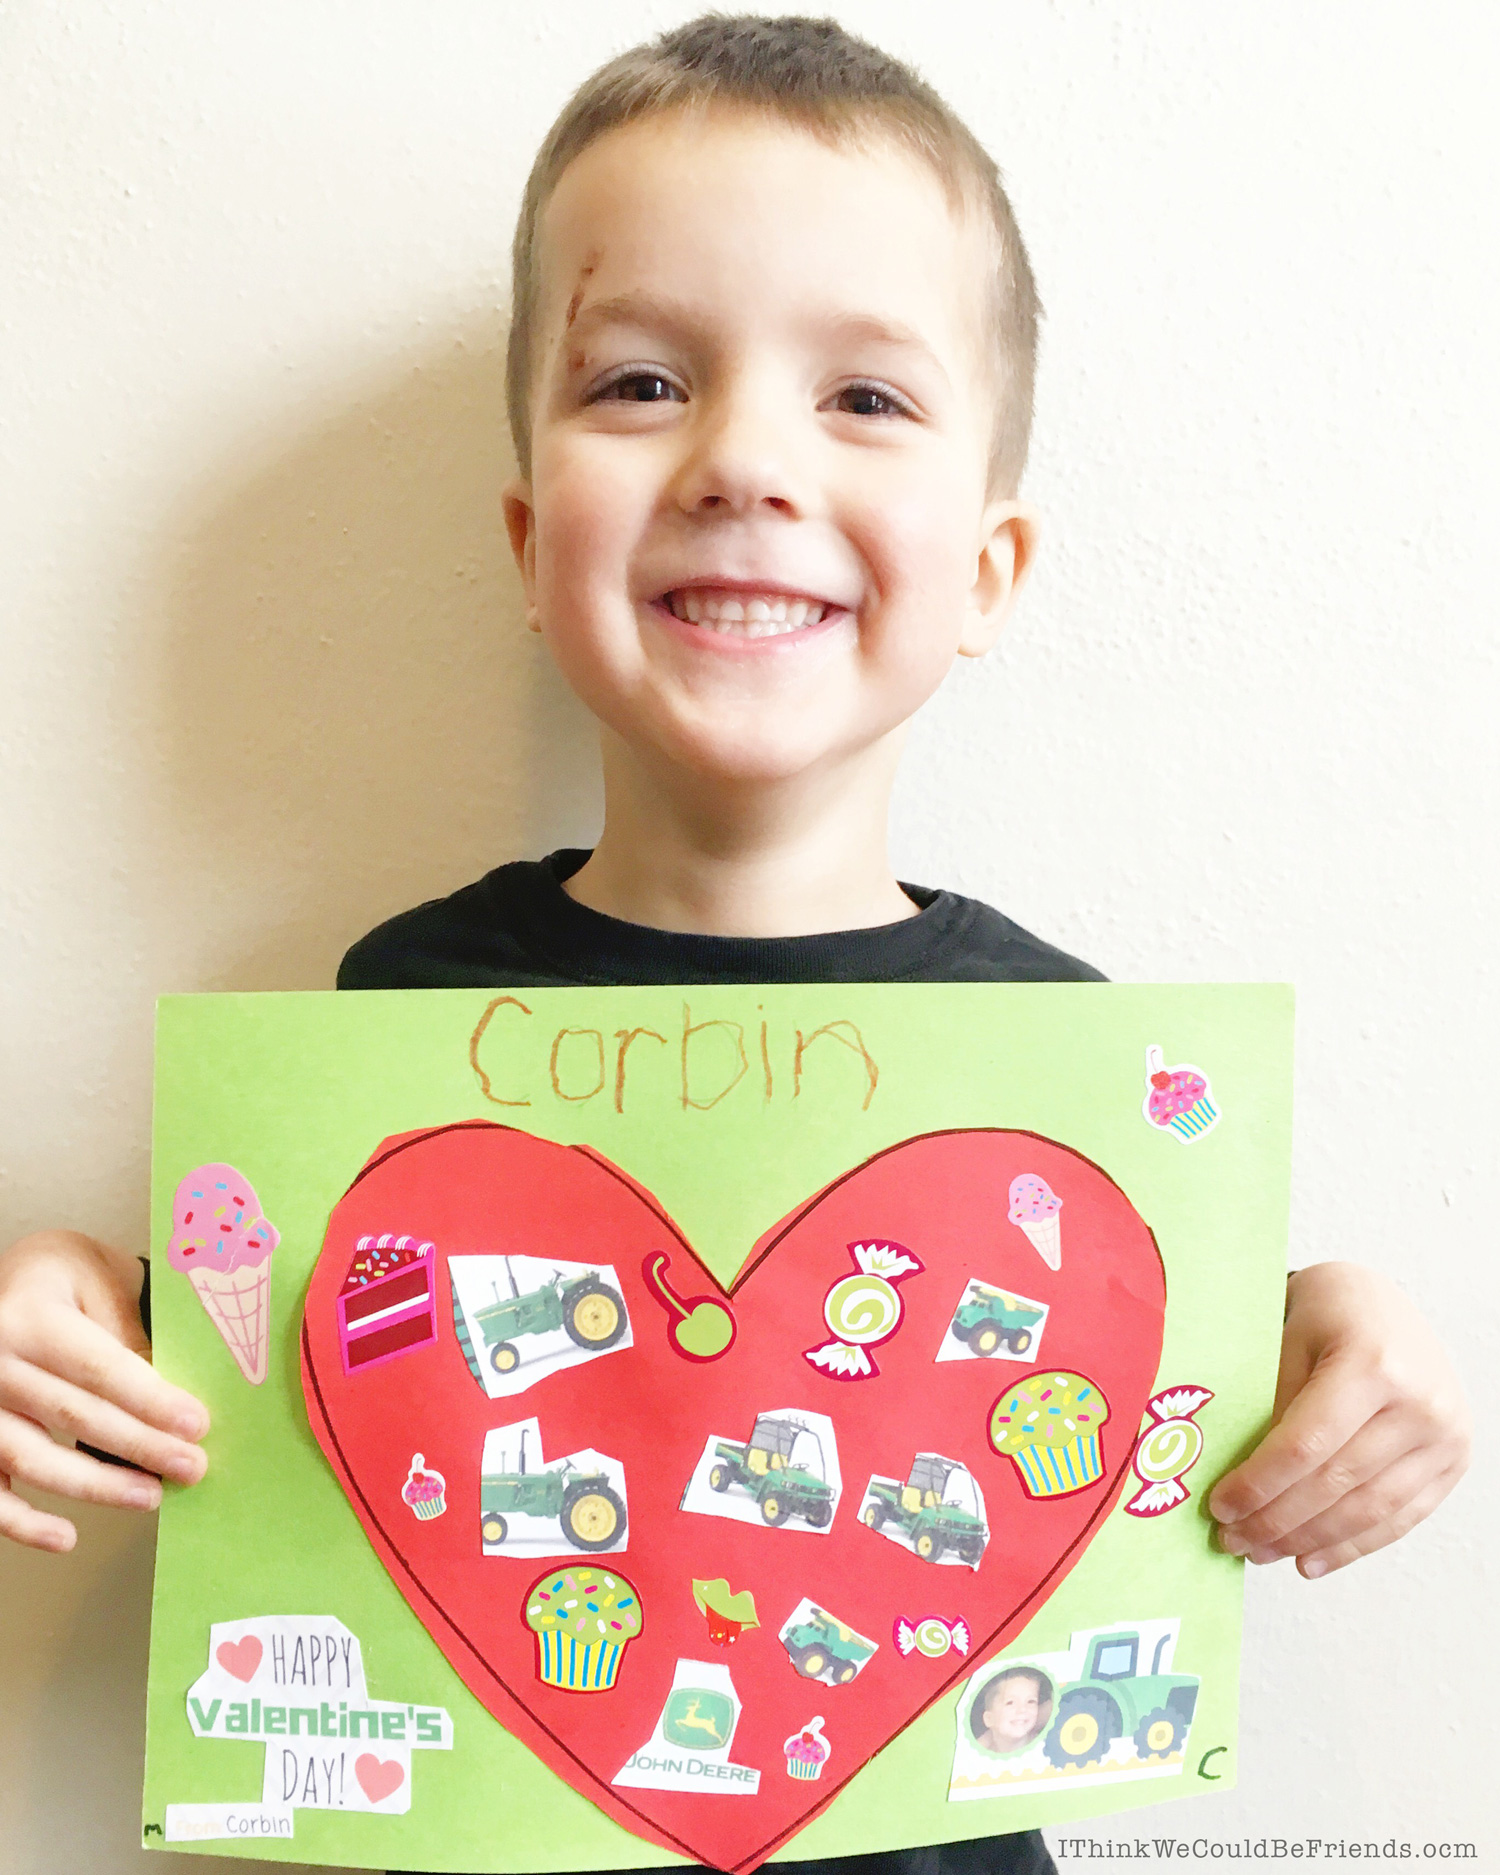 The John Deere fan in your house will LOVE these free printable John Deere Valentine's! Easy directions to customize them with your child's picture and name or just print the blank ones, they're free either way!! Our boys are SO excited to give these tractor valentine's out at school! #free #printable #john #deere #tractor #valentines #boys #kids #deer #customizable #loader #boy #green #heart